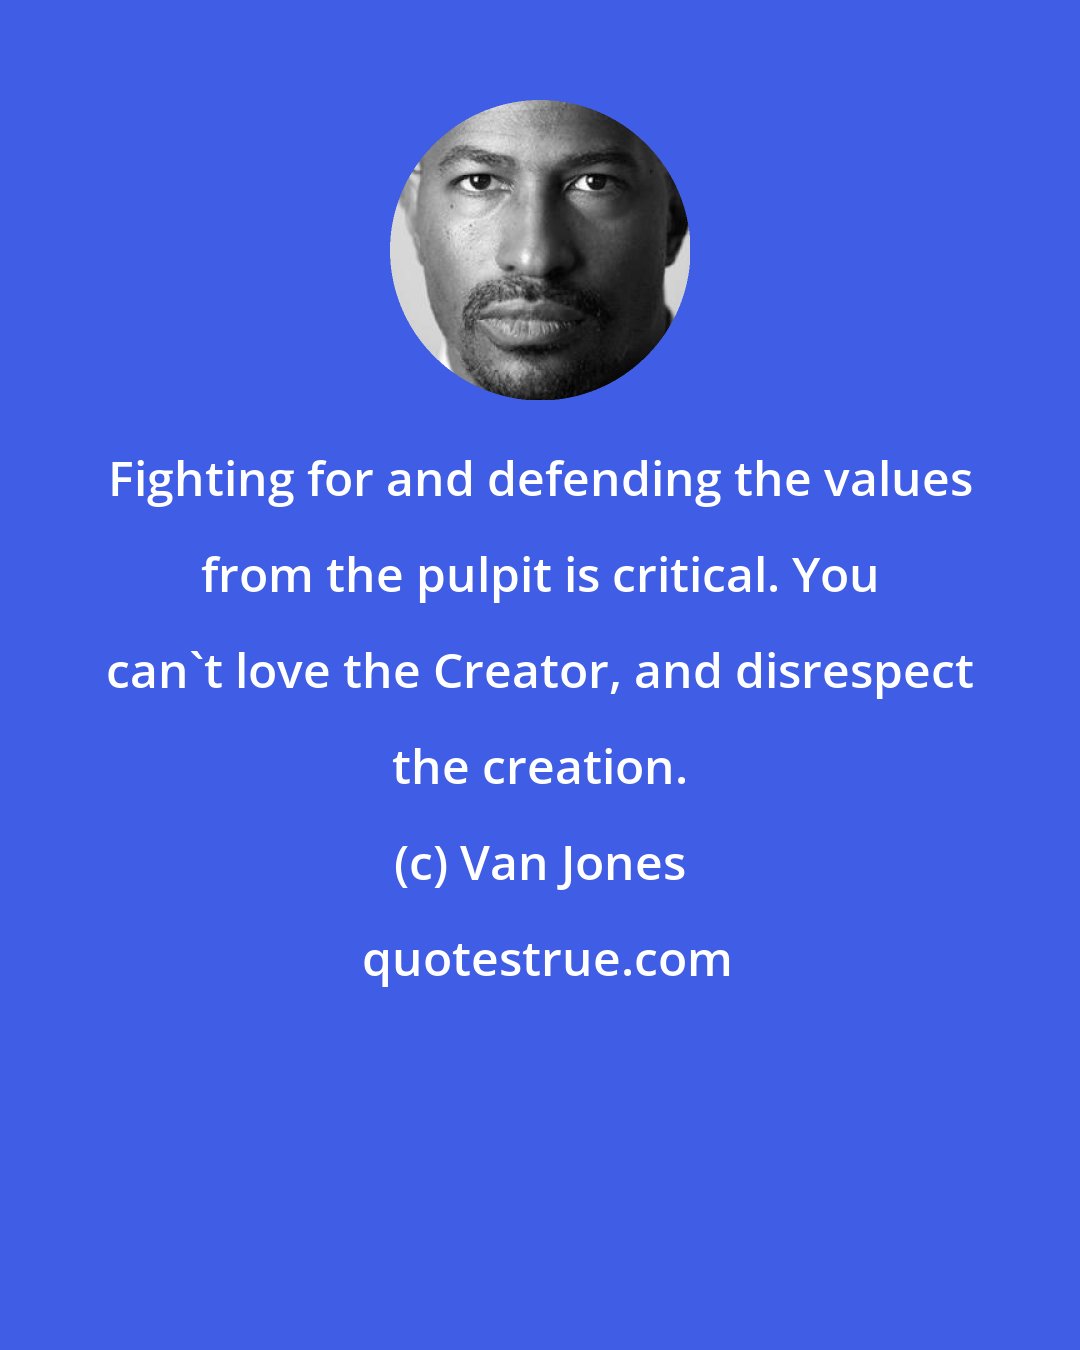 Van Jones: Fighting for and defending the values from the pulpit is critical. You can't love the Creator, and disrespect the creation.